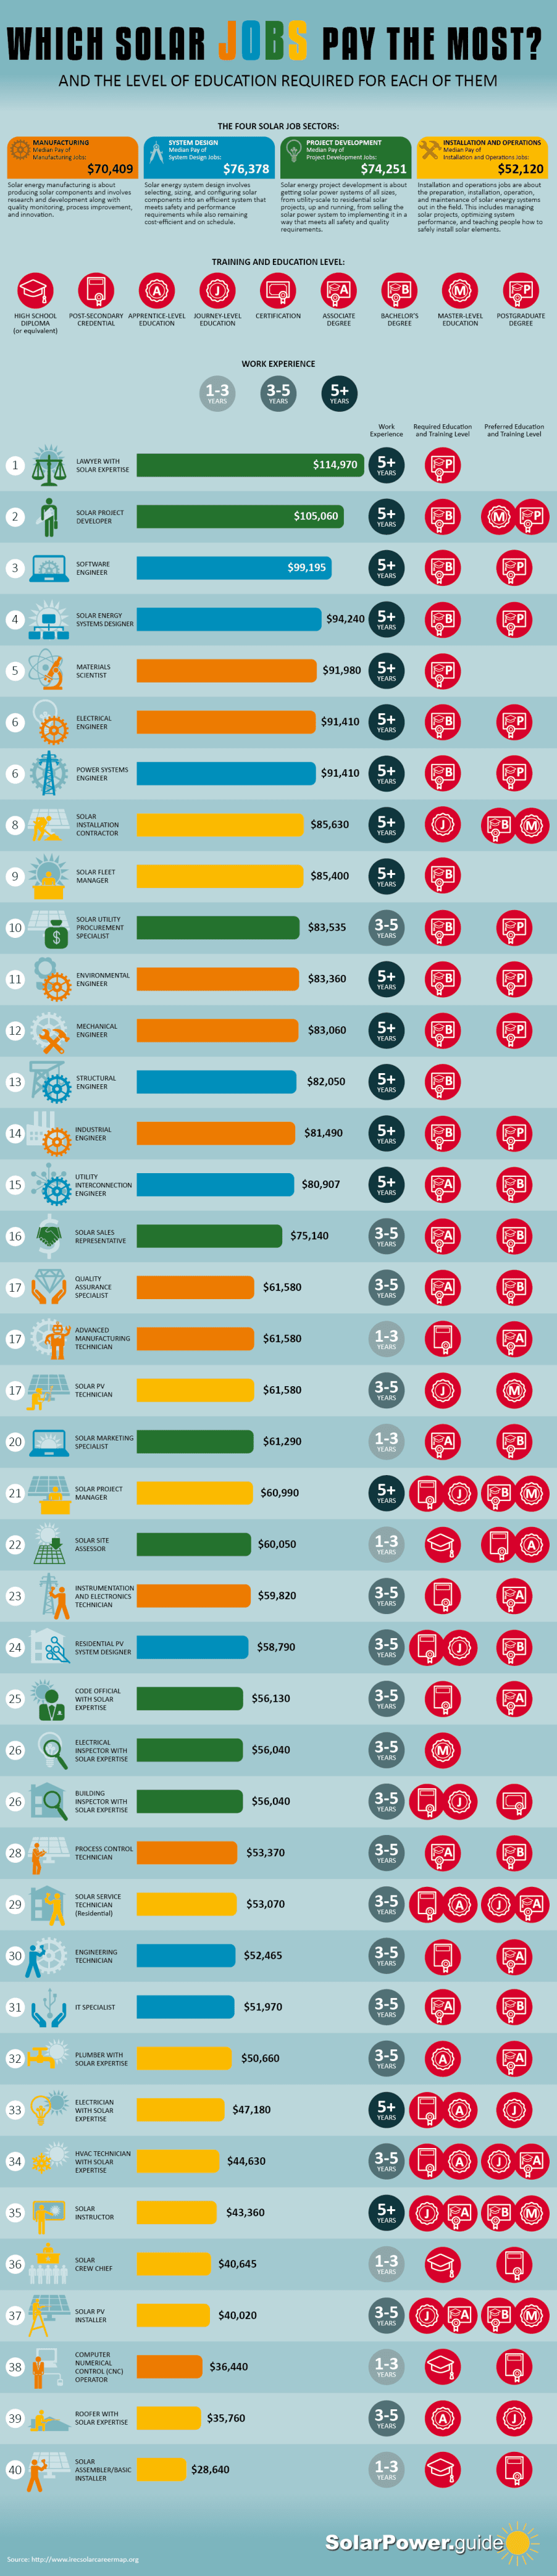 which-solar-jobs-pay-most - Infographic